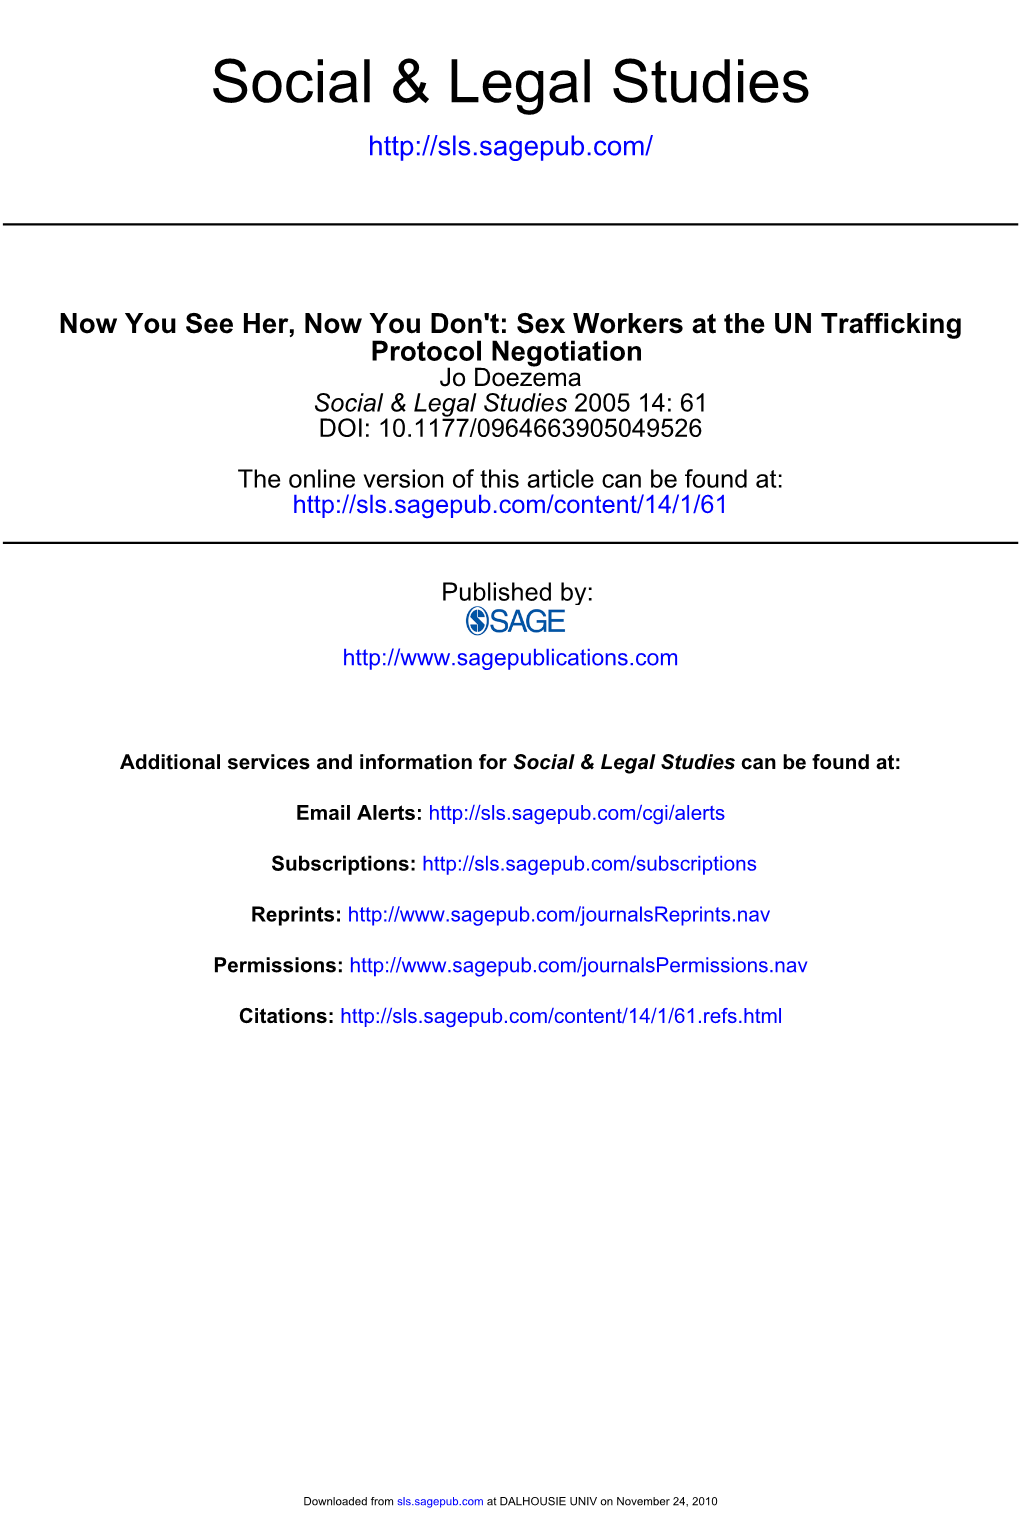 Now You See Her, Now You Don't: Sex Workers at the UN Trafficking Protocol Negotiation Jo Doezema Social & Legal Studies 2005 14: 61 DOI: 10.1177/0964663905049526